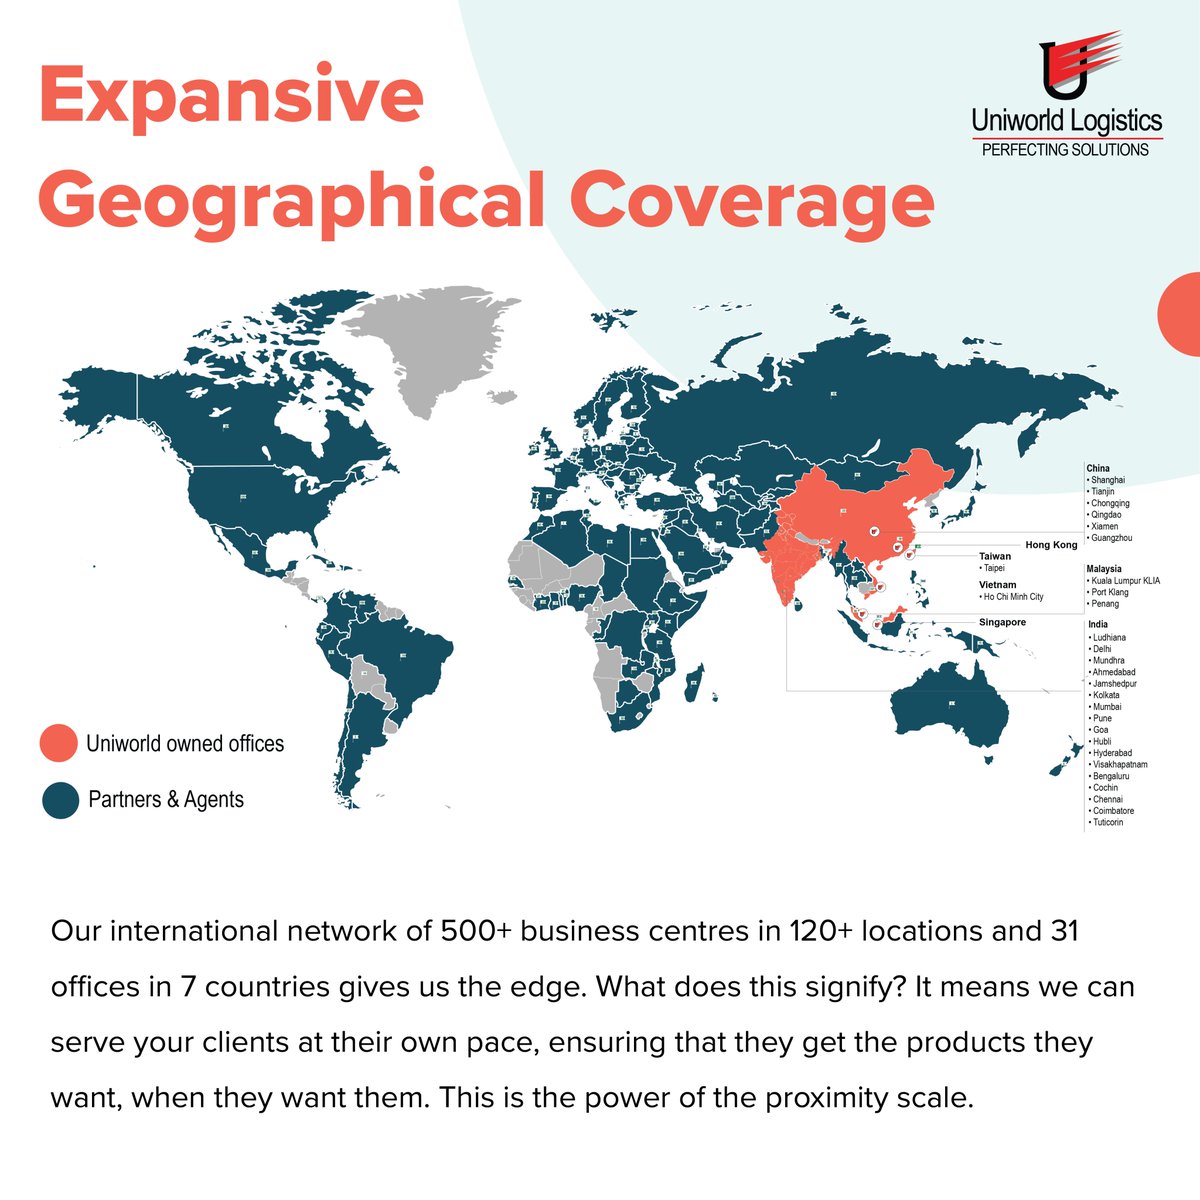 Expansive Geographical Coverage 
.
.
.

Our international network of 500+ business centres in 120+ locations and 31 offices in 7 countries gives us the edge. 

#logistics #transportation #warehouse #airfright #cargo #bigConsignmentshiping